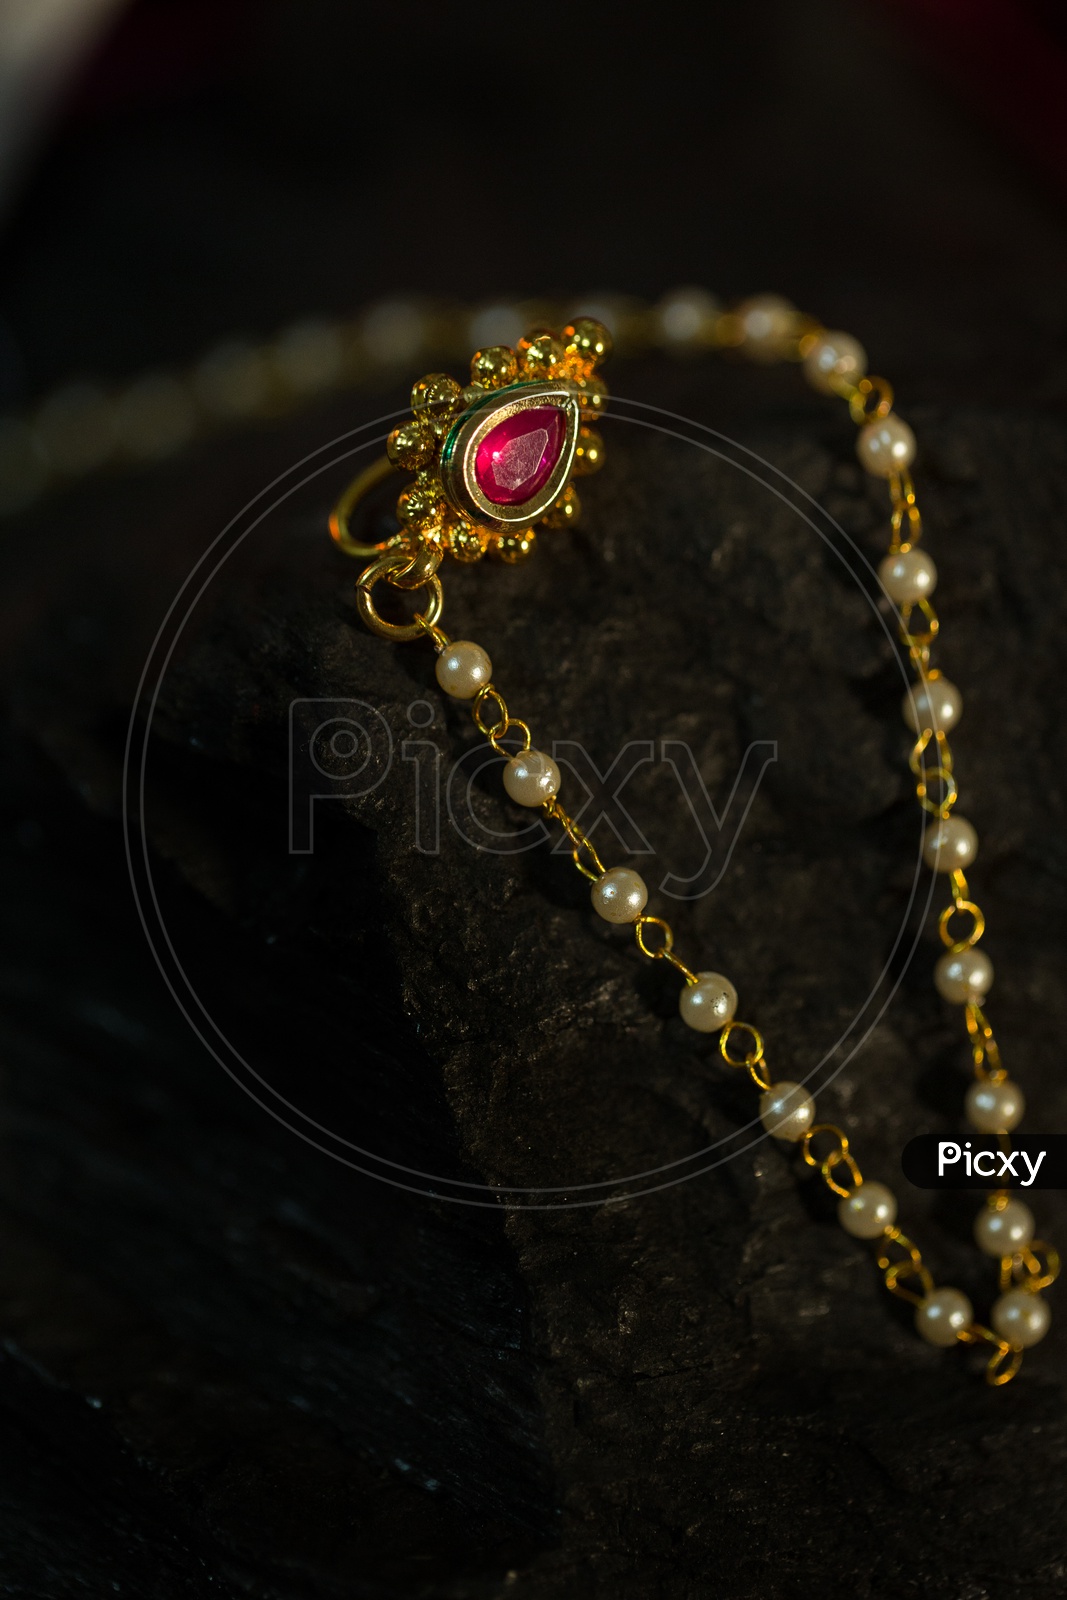 A Beautiful Indian Bridal Chain with Pearls and Gold Pendent Closeup Shot